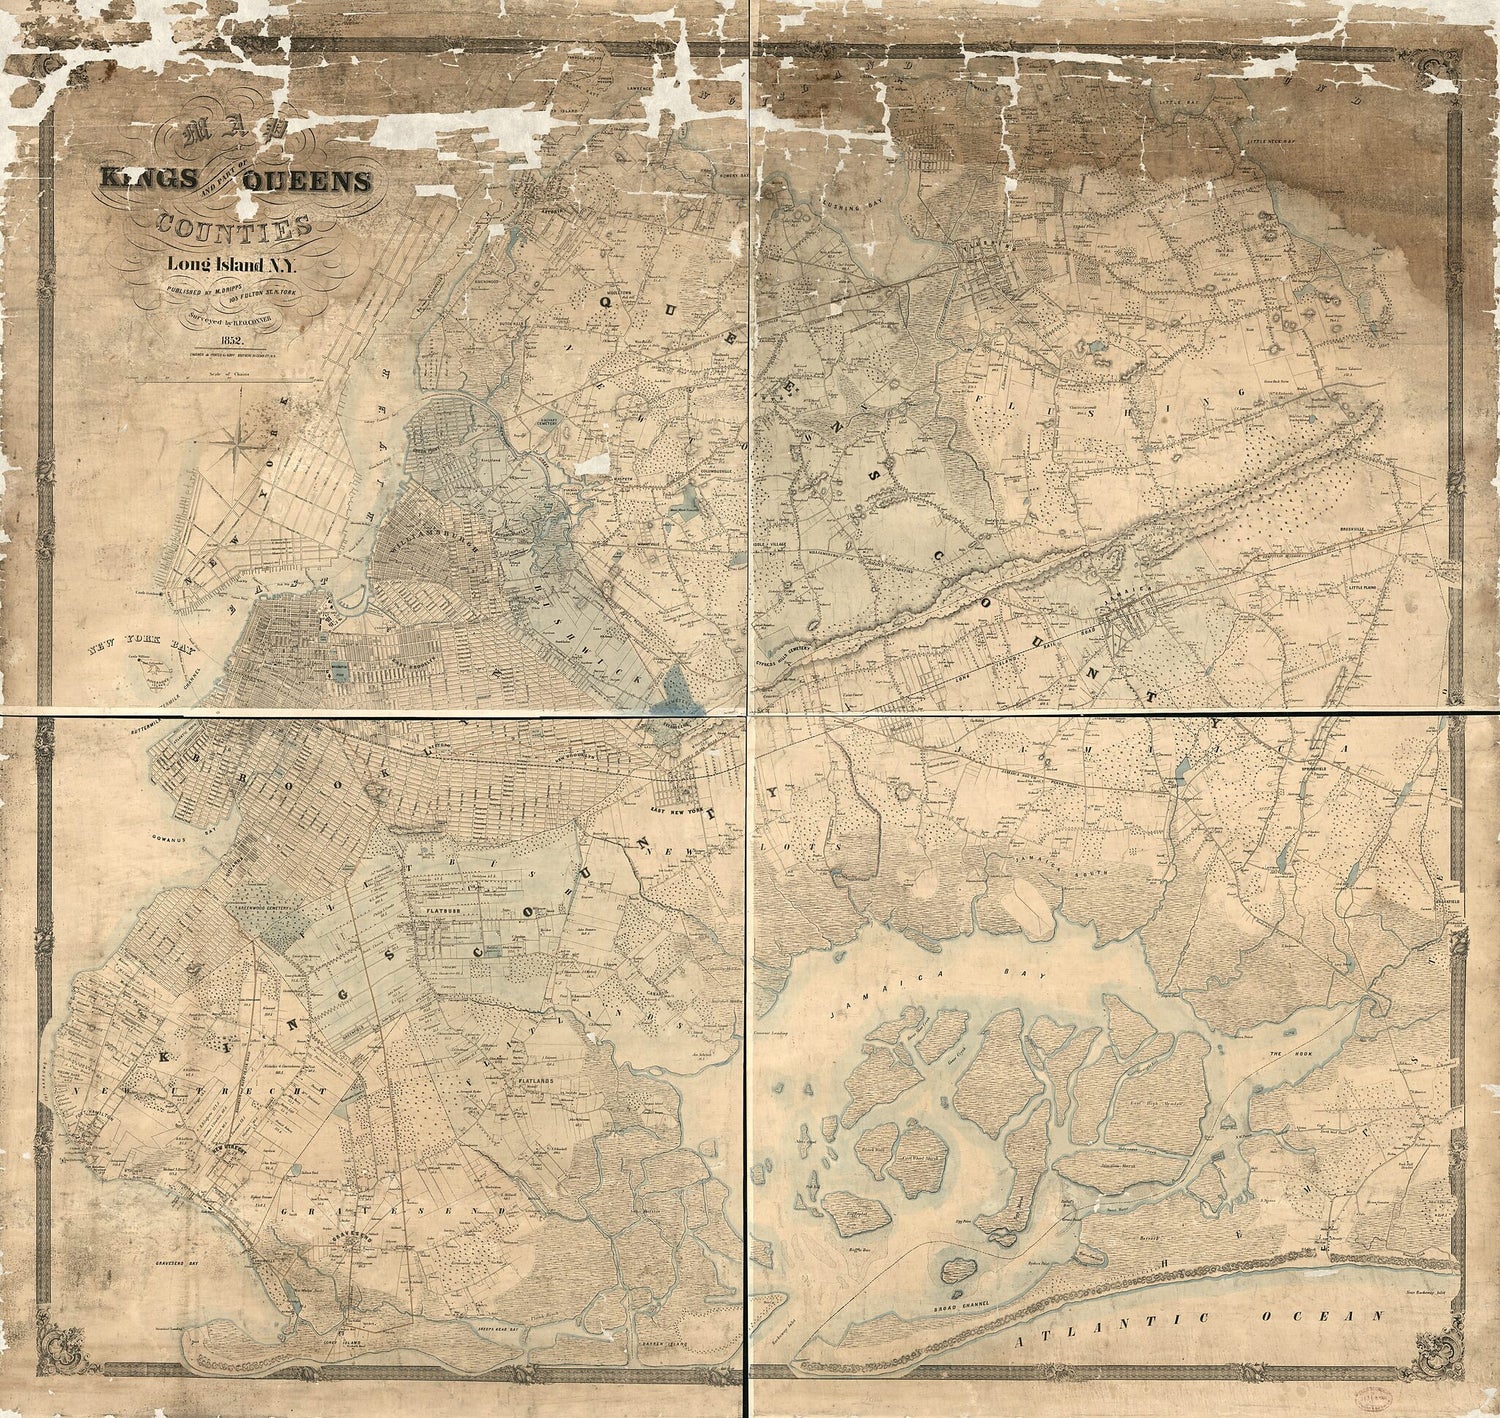 This old map of Map of Kings and Part of Queens Counties, Long Island New York from 1852 was created by R. F. O. Conner, M. (Matthew) Dripps,  Korff Brothers in 1852